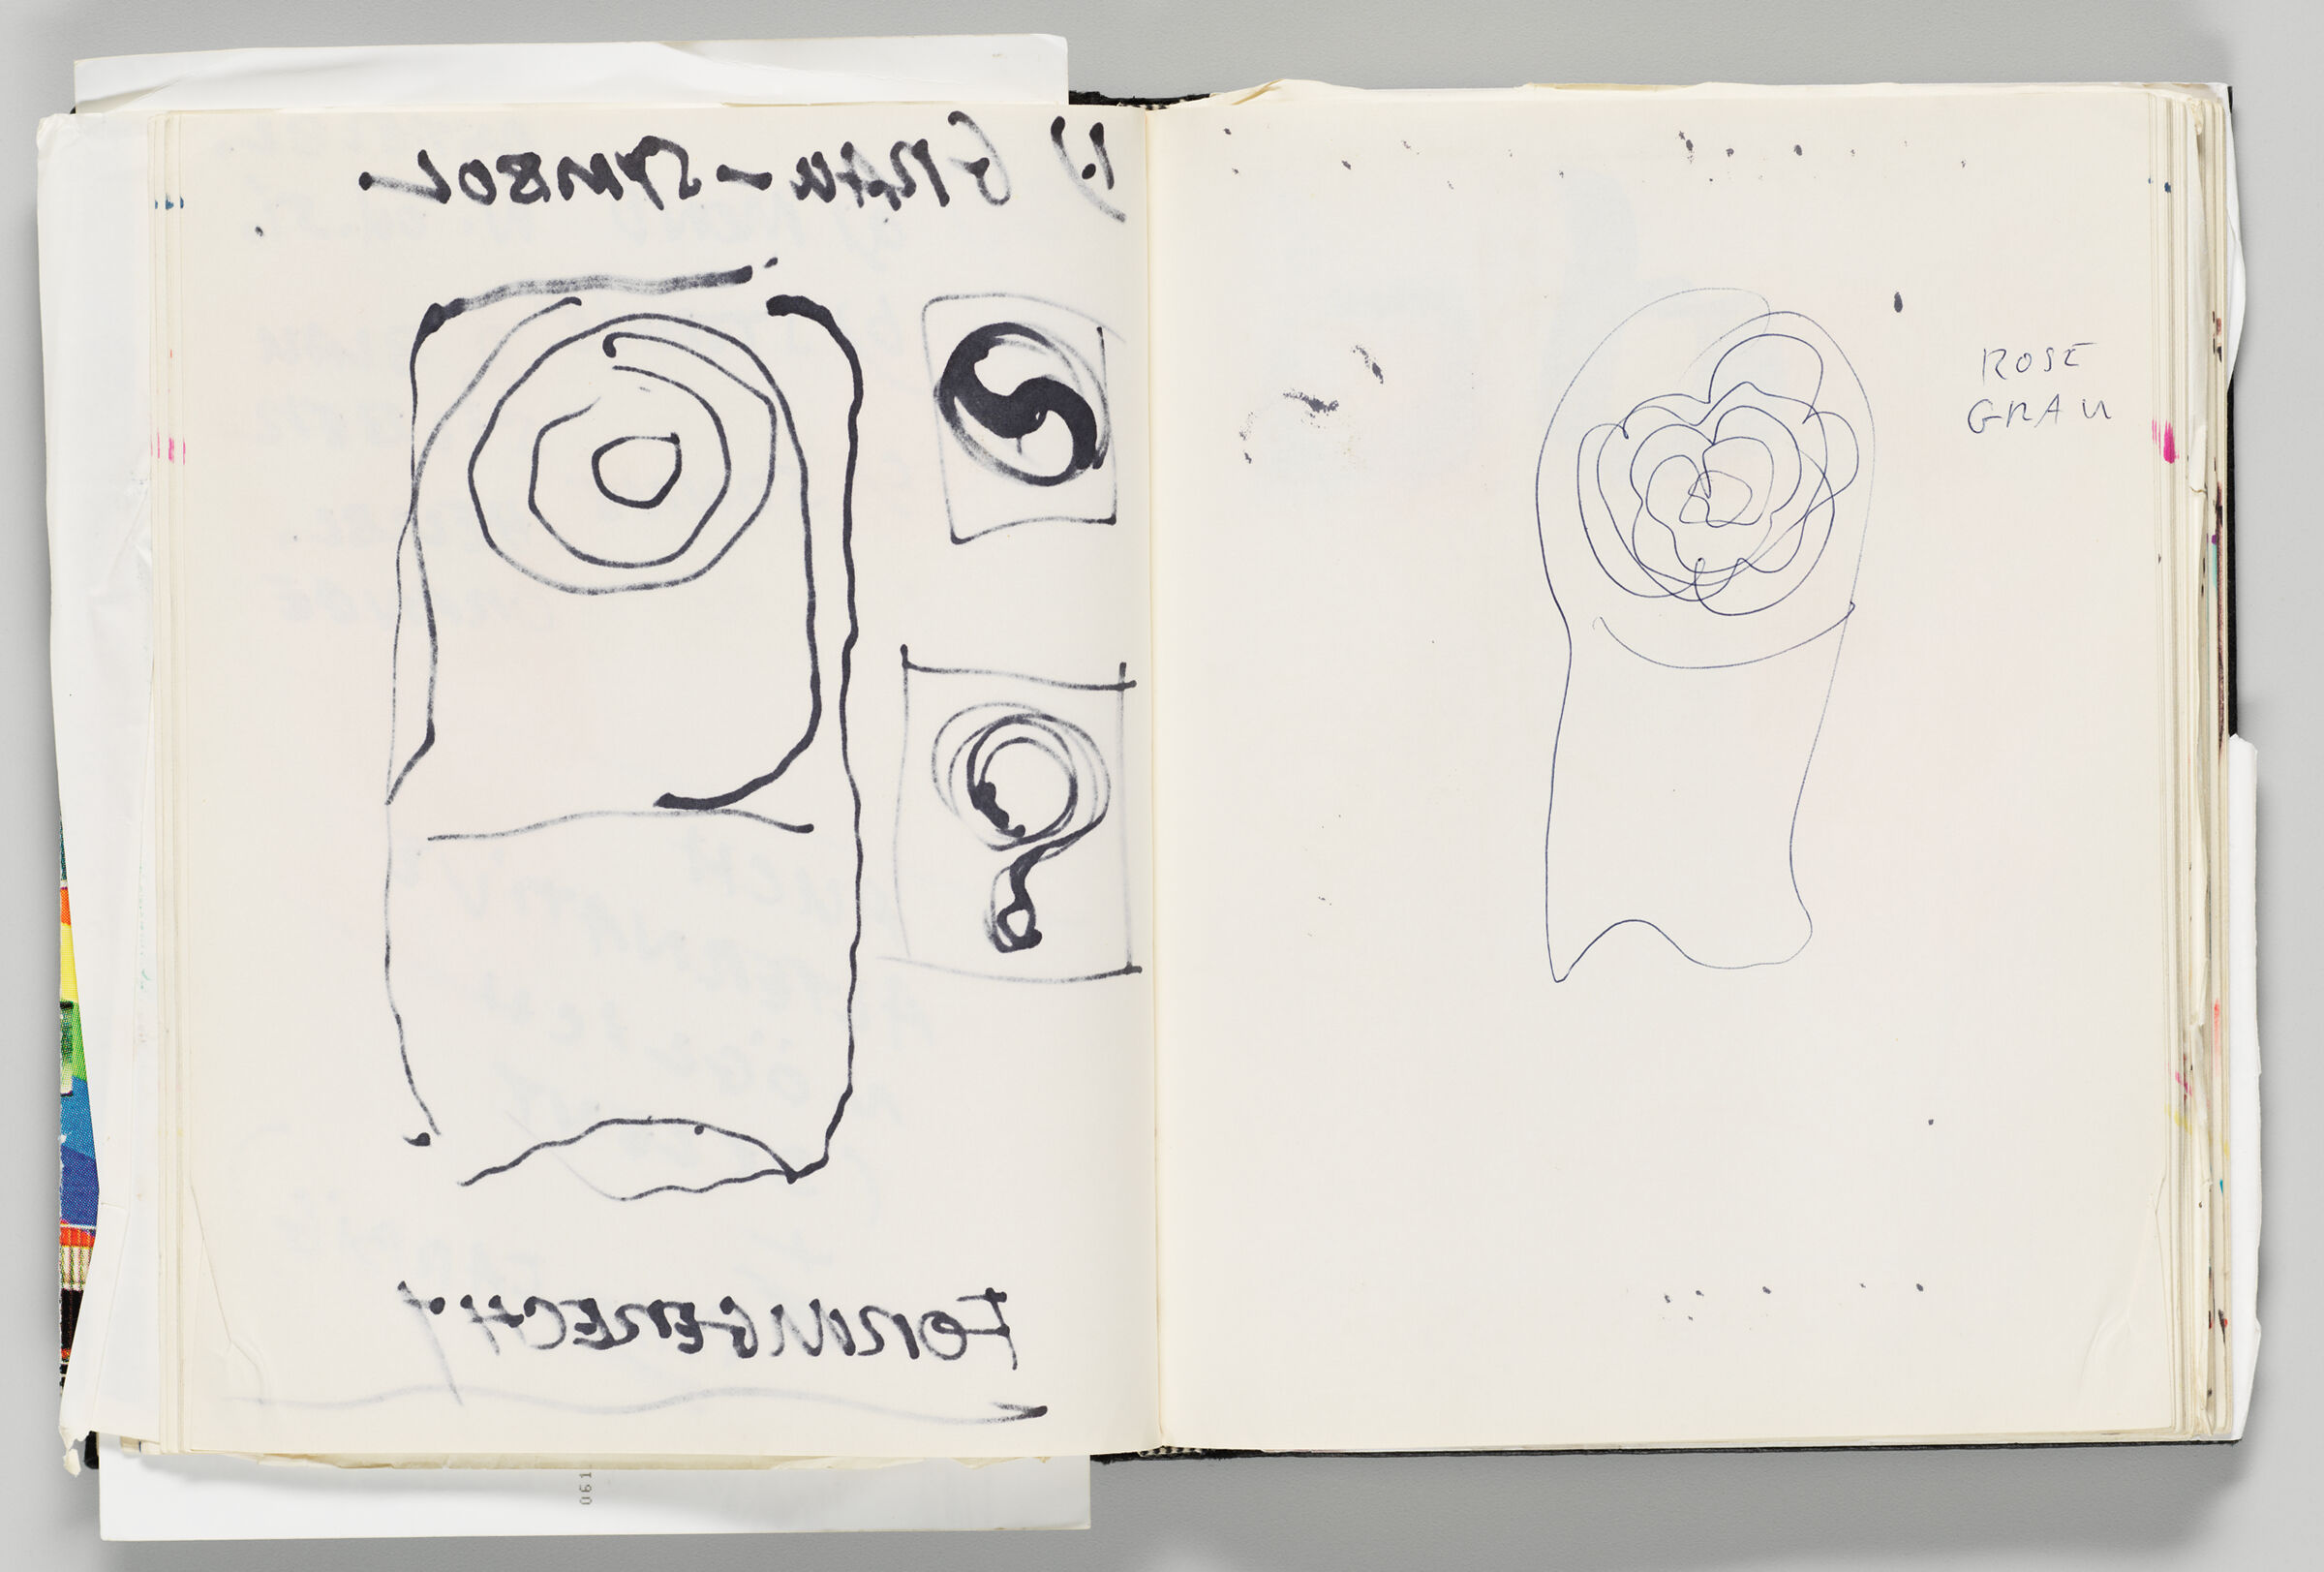 Untitled (Bleed-Through Of Previous Page, Left Page); Untitled (Design And Note With Faint Color Transfer, Right Page)